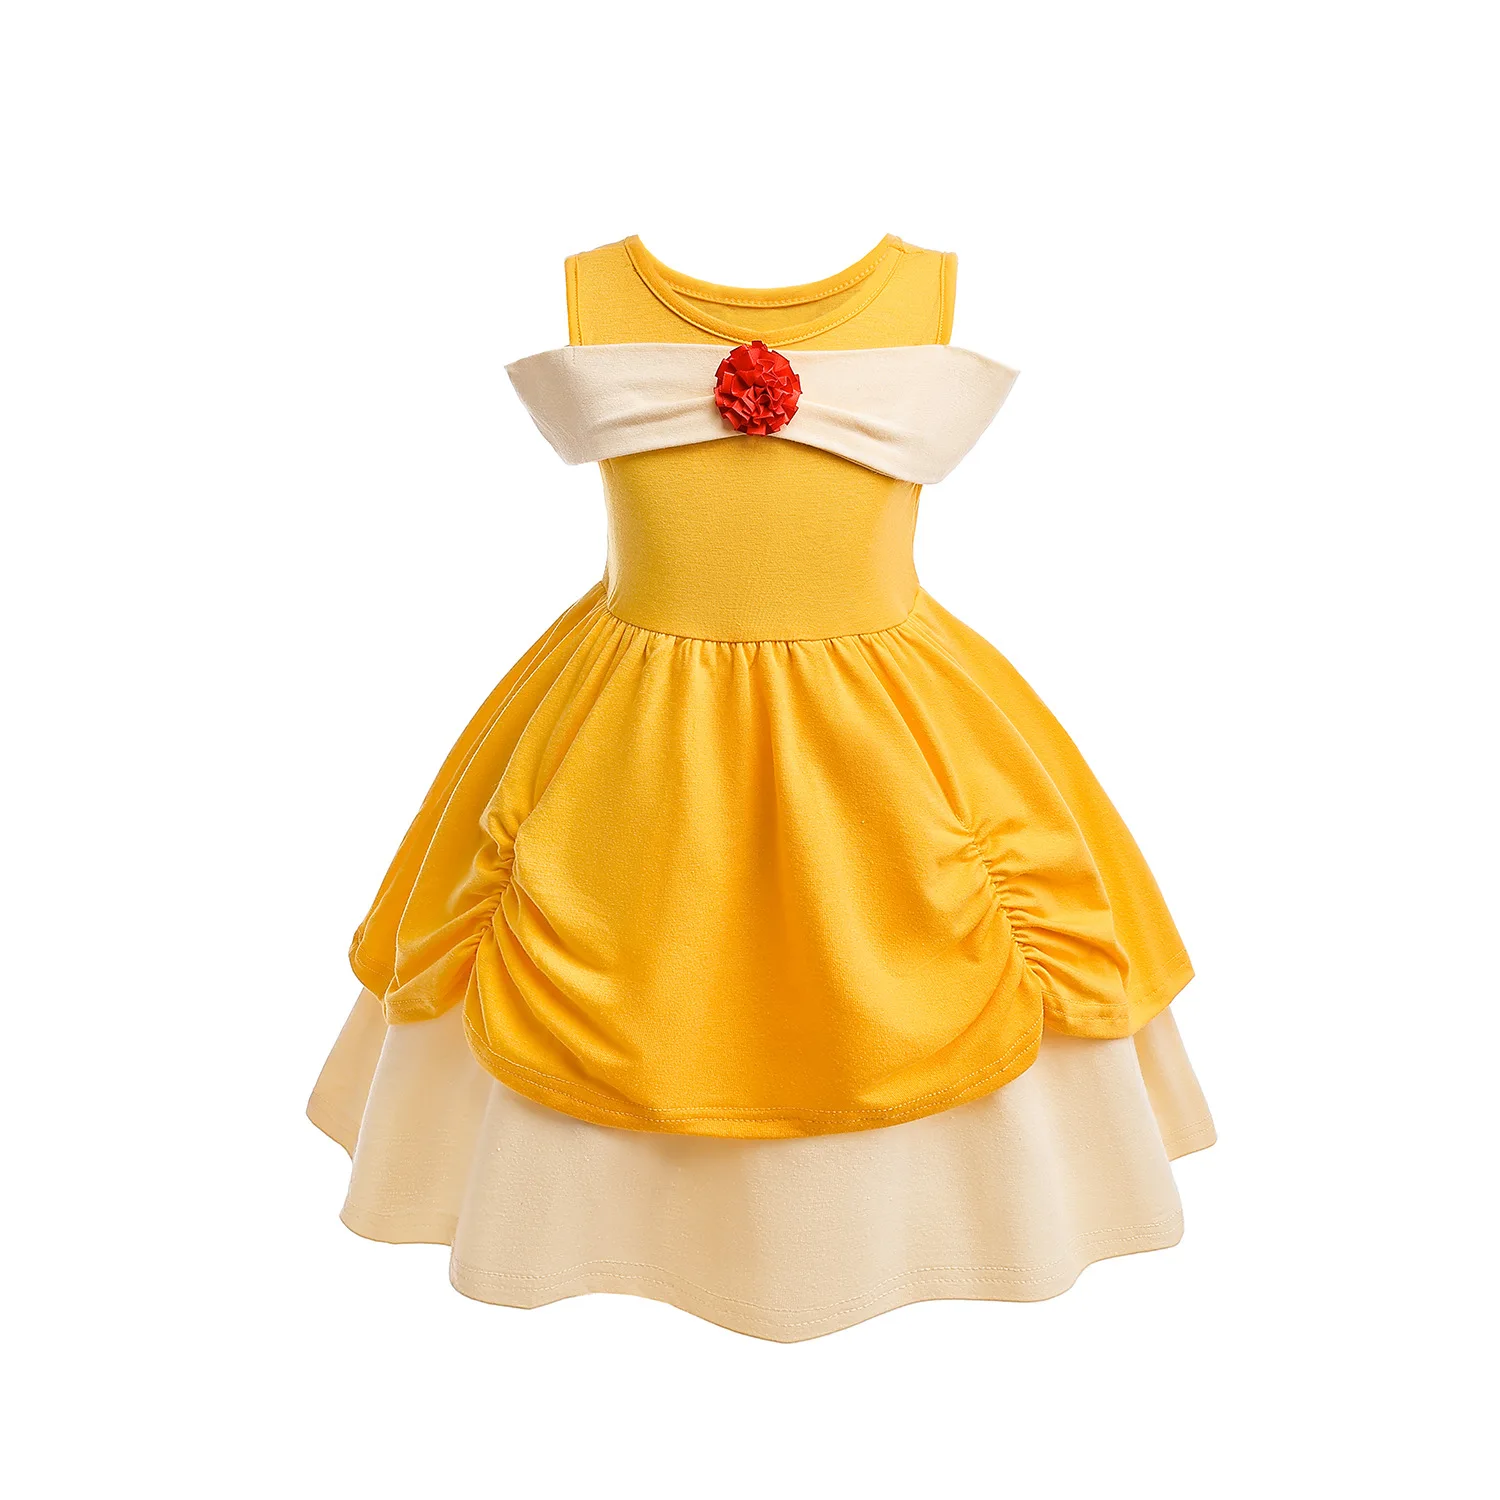 

Princess Belle Girl Dress Kids Floral Ball Gown Child Cosplay Bella Beauty and The Beast Costume Fancy Party Halloween Costume